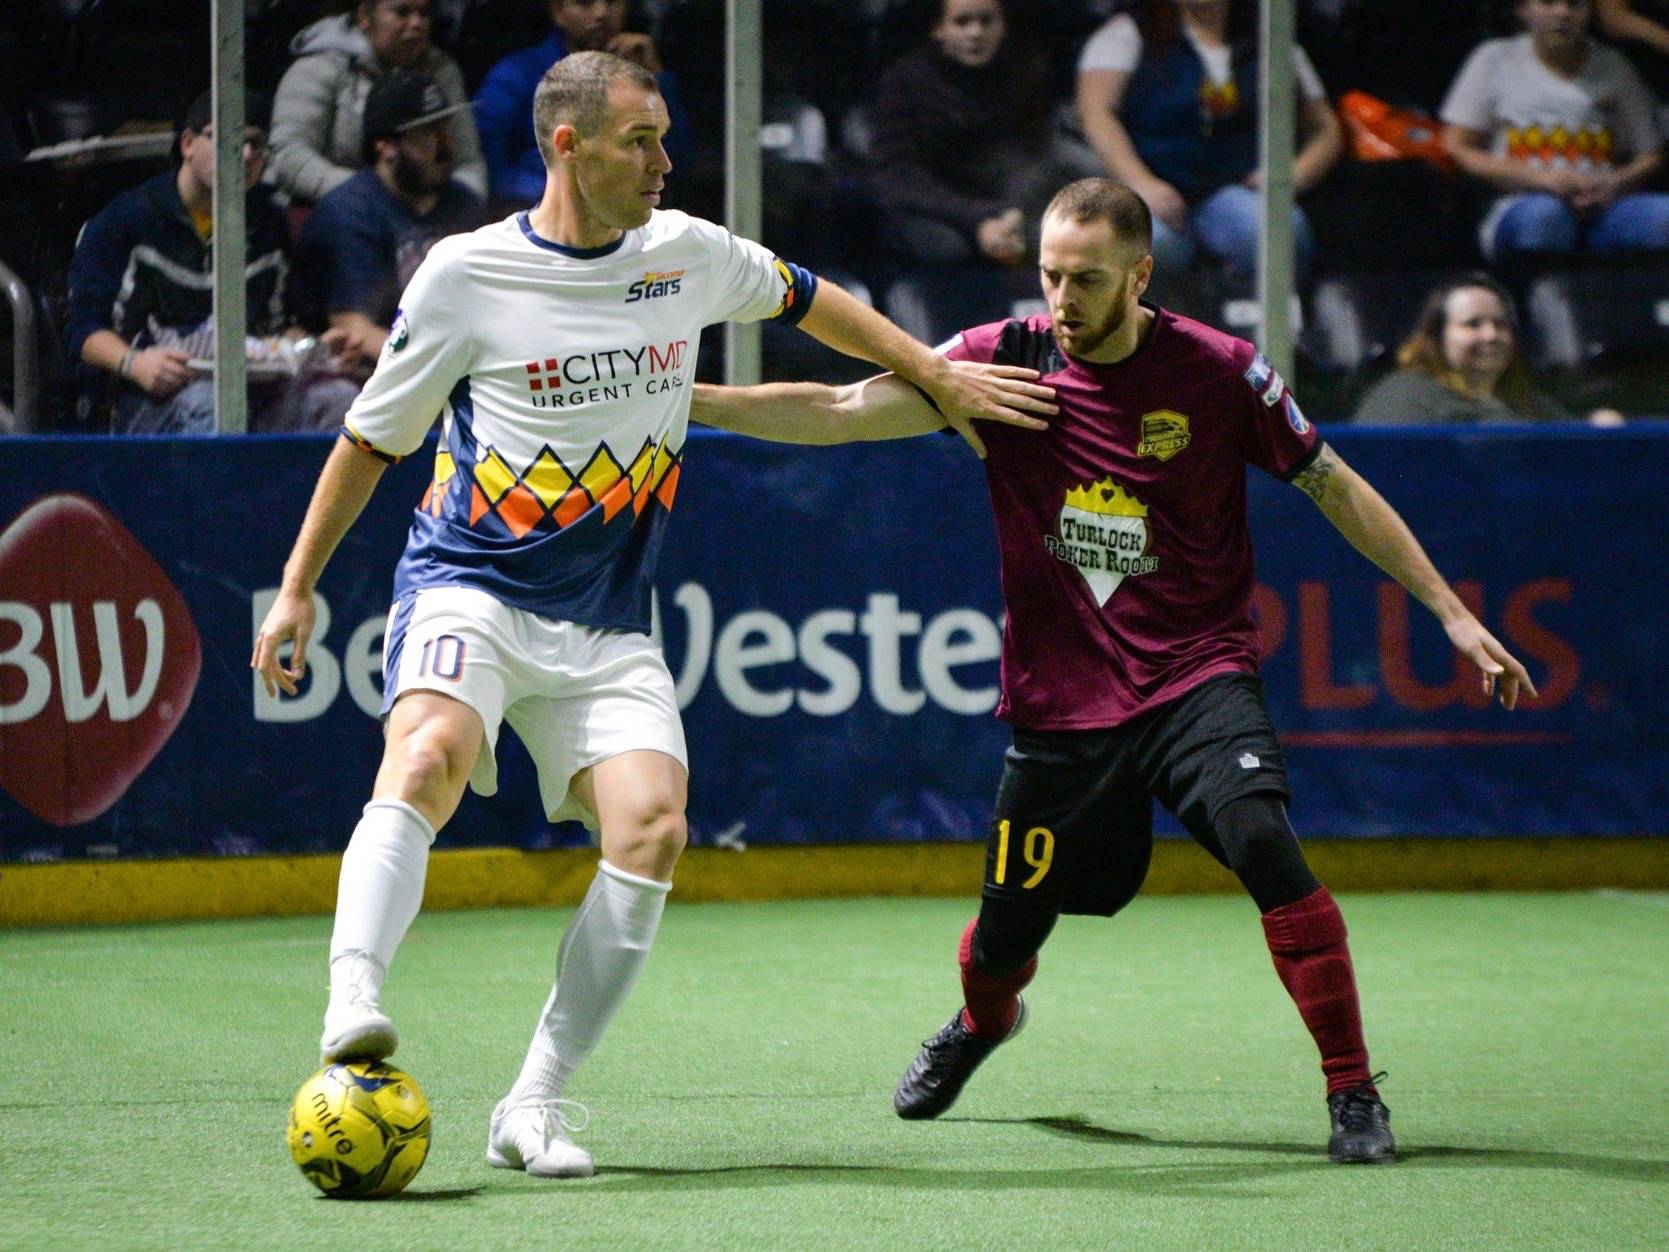 The Stars’ Nick Perera, left, looks to advance the ball against the Express’ Matthew Germain during MASL play Dec. 1. Perera is now taking on the role as head coach for the club. COURTESY PHOTO, Stars